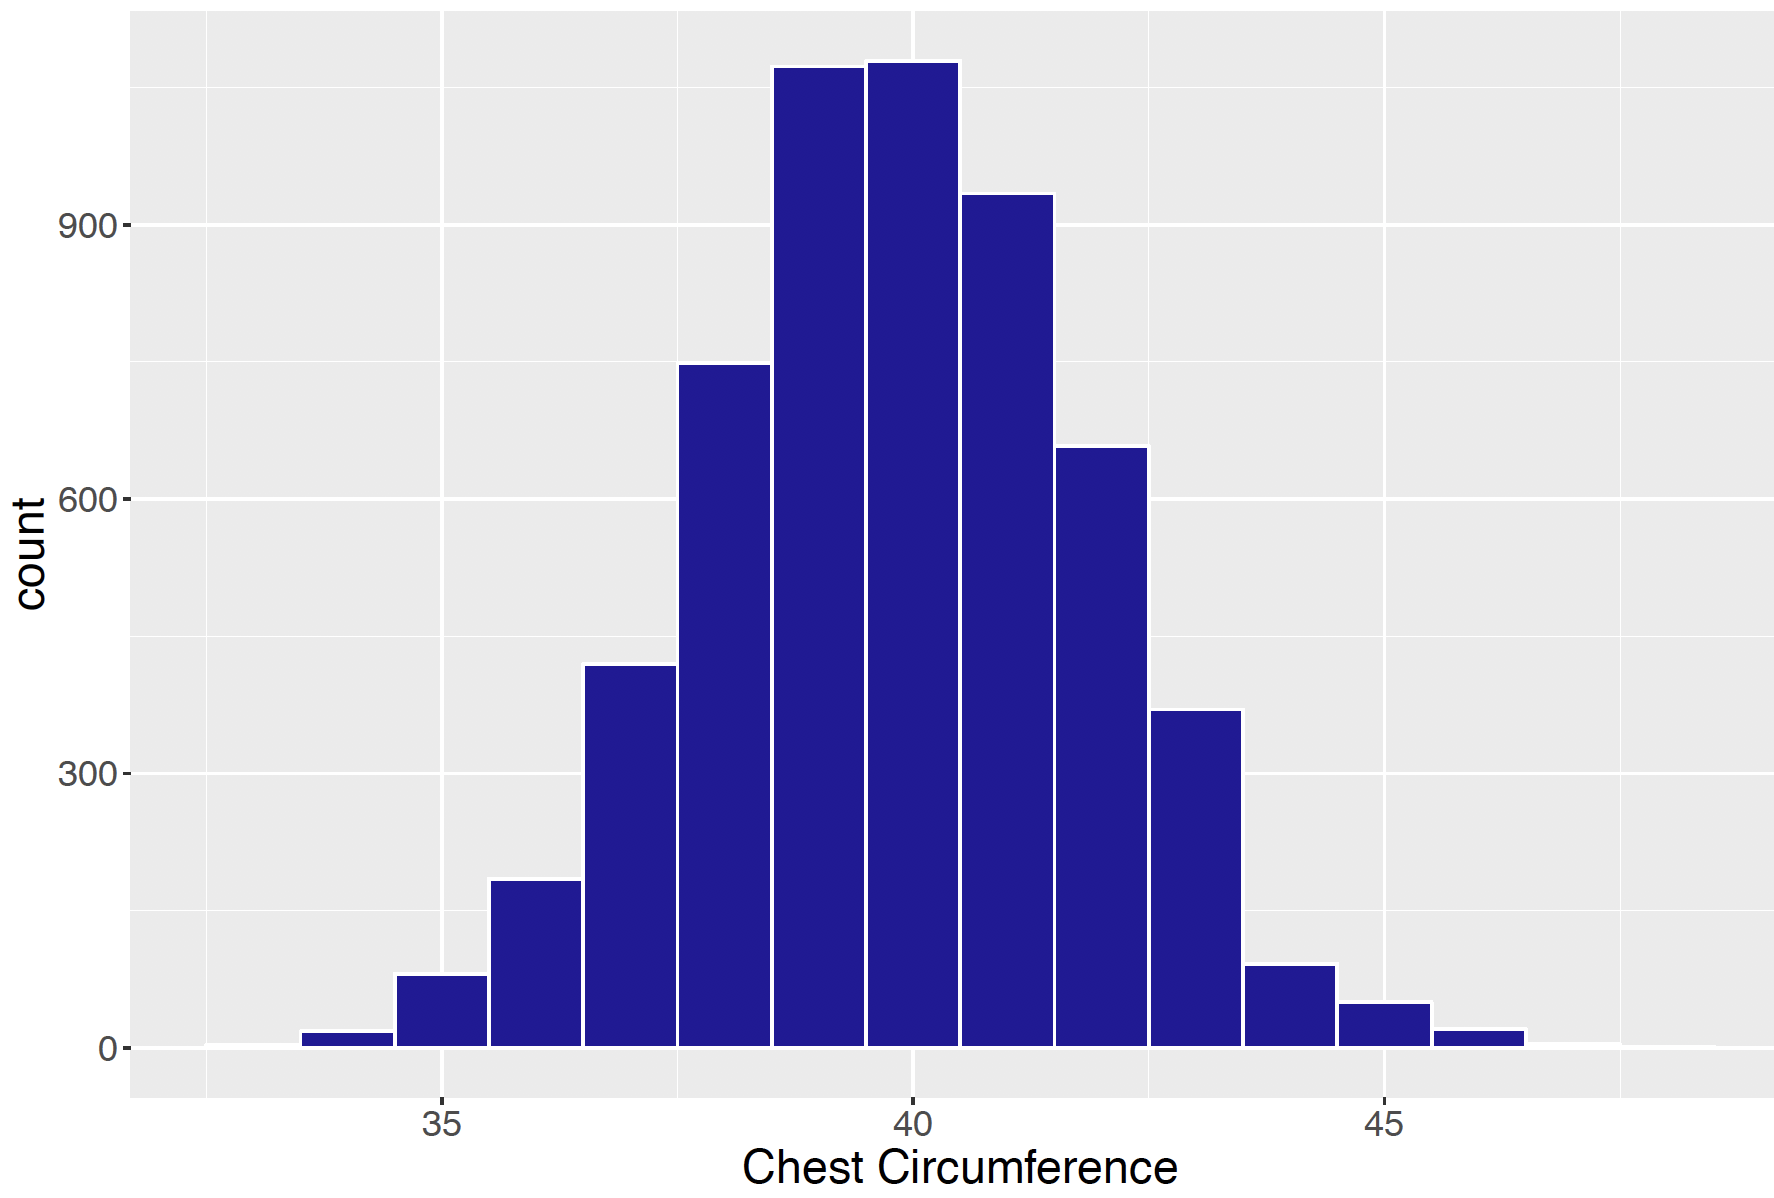 Histogram of chest circumference measurements of Scottish soldiers.